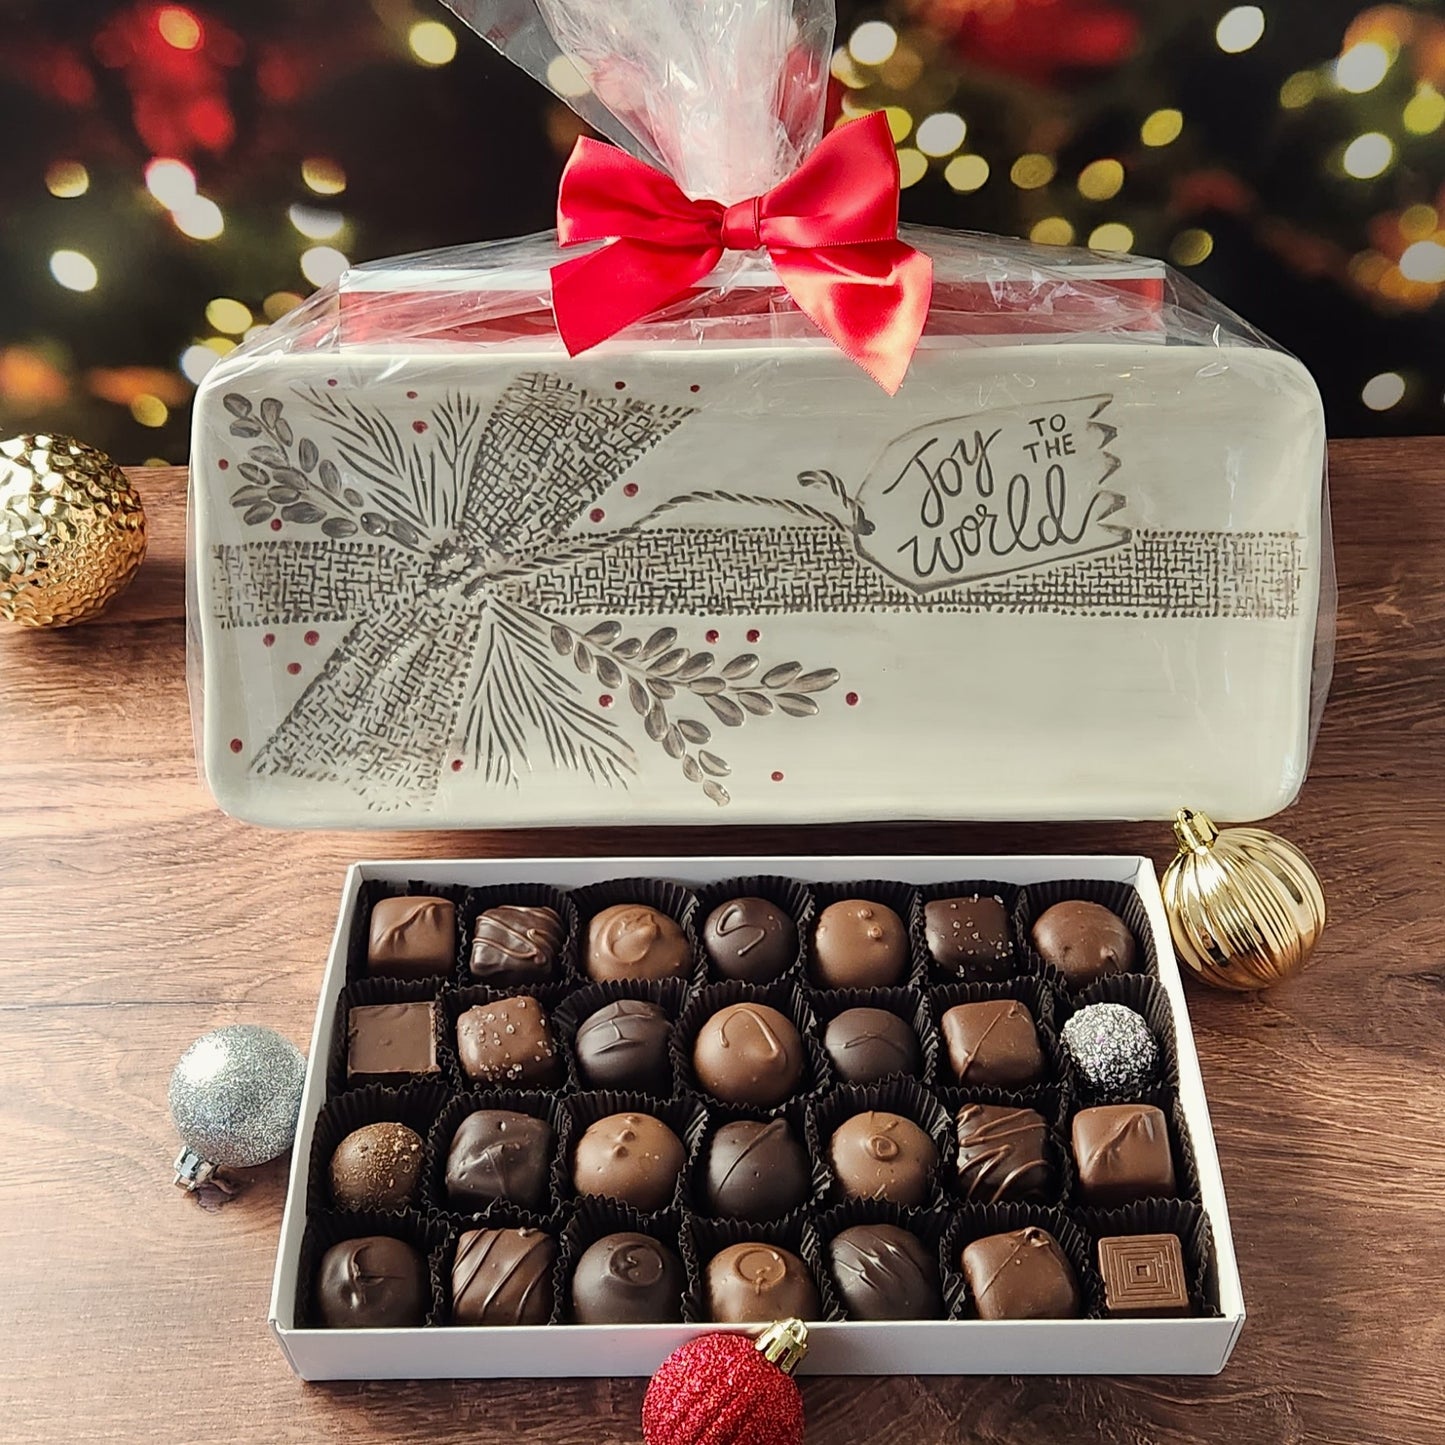 Enjoy 28 pieces of Stage Stop Candy's most popular milk and dark chocolates on a ceramic tray inscribed with "Joy to the World" and festive bow